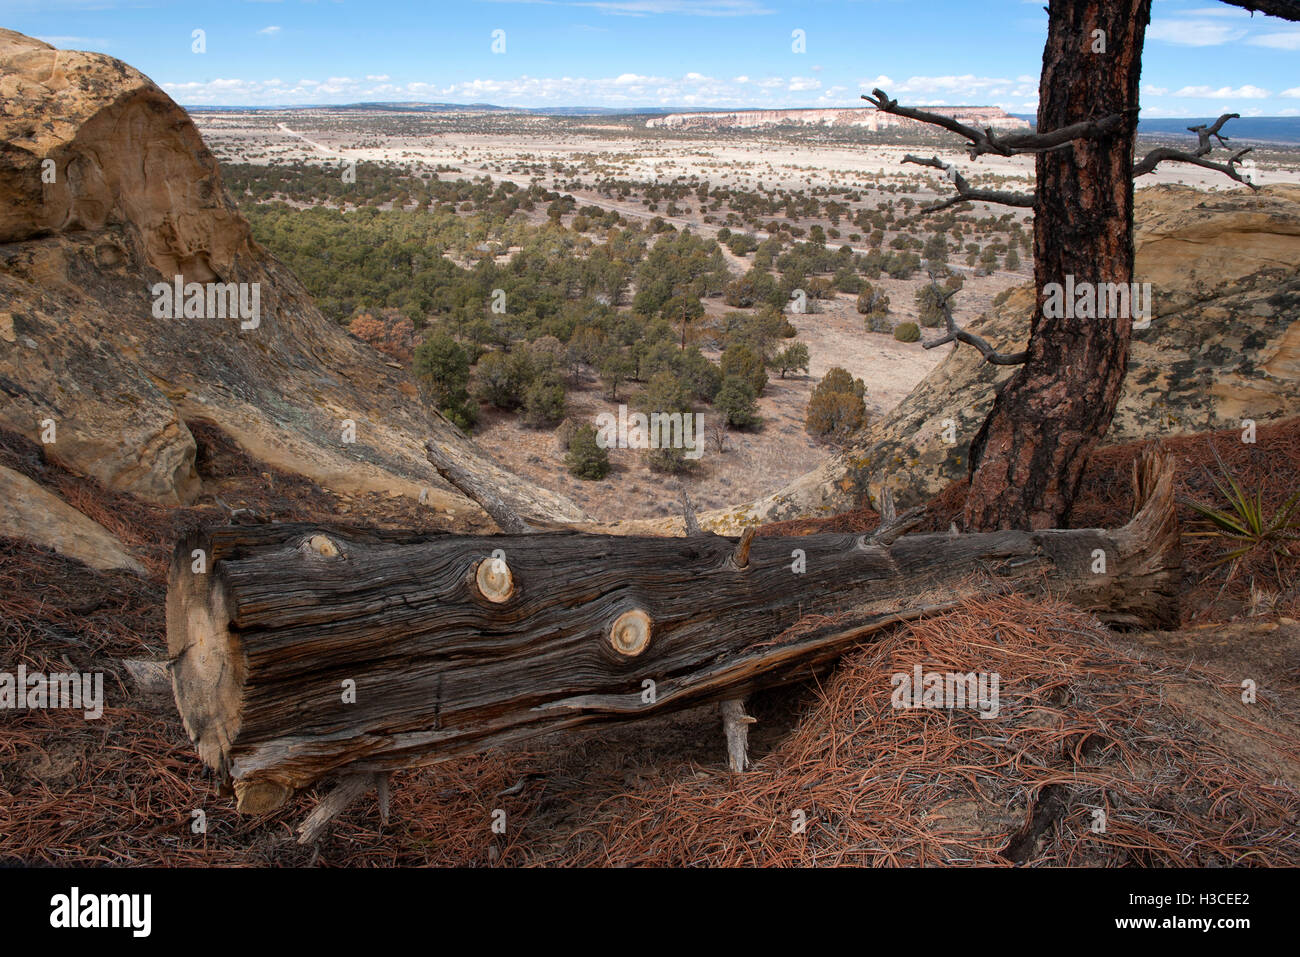 Fallen tree trunk overlooking arid landscape in New Mexico, USA Stock Photo